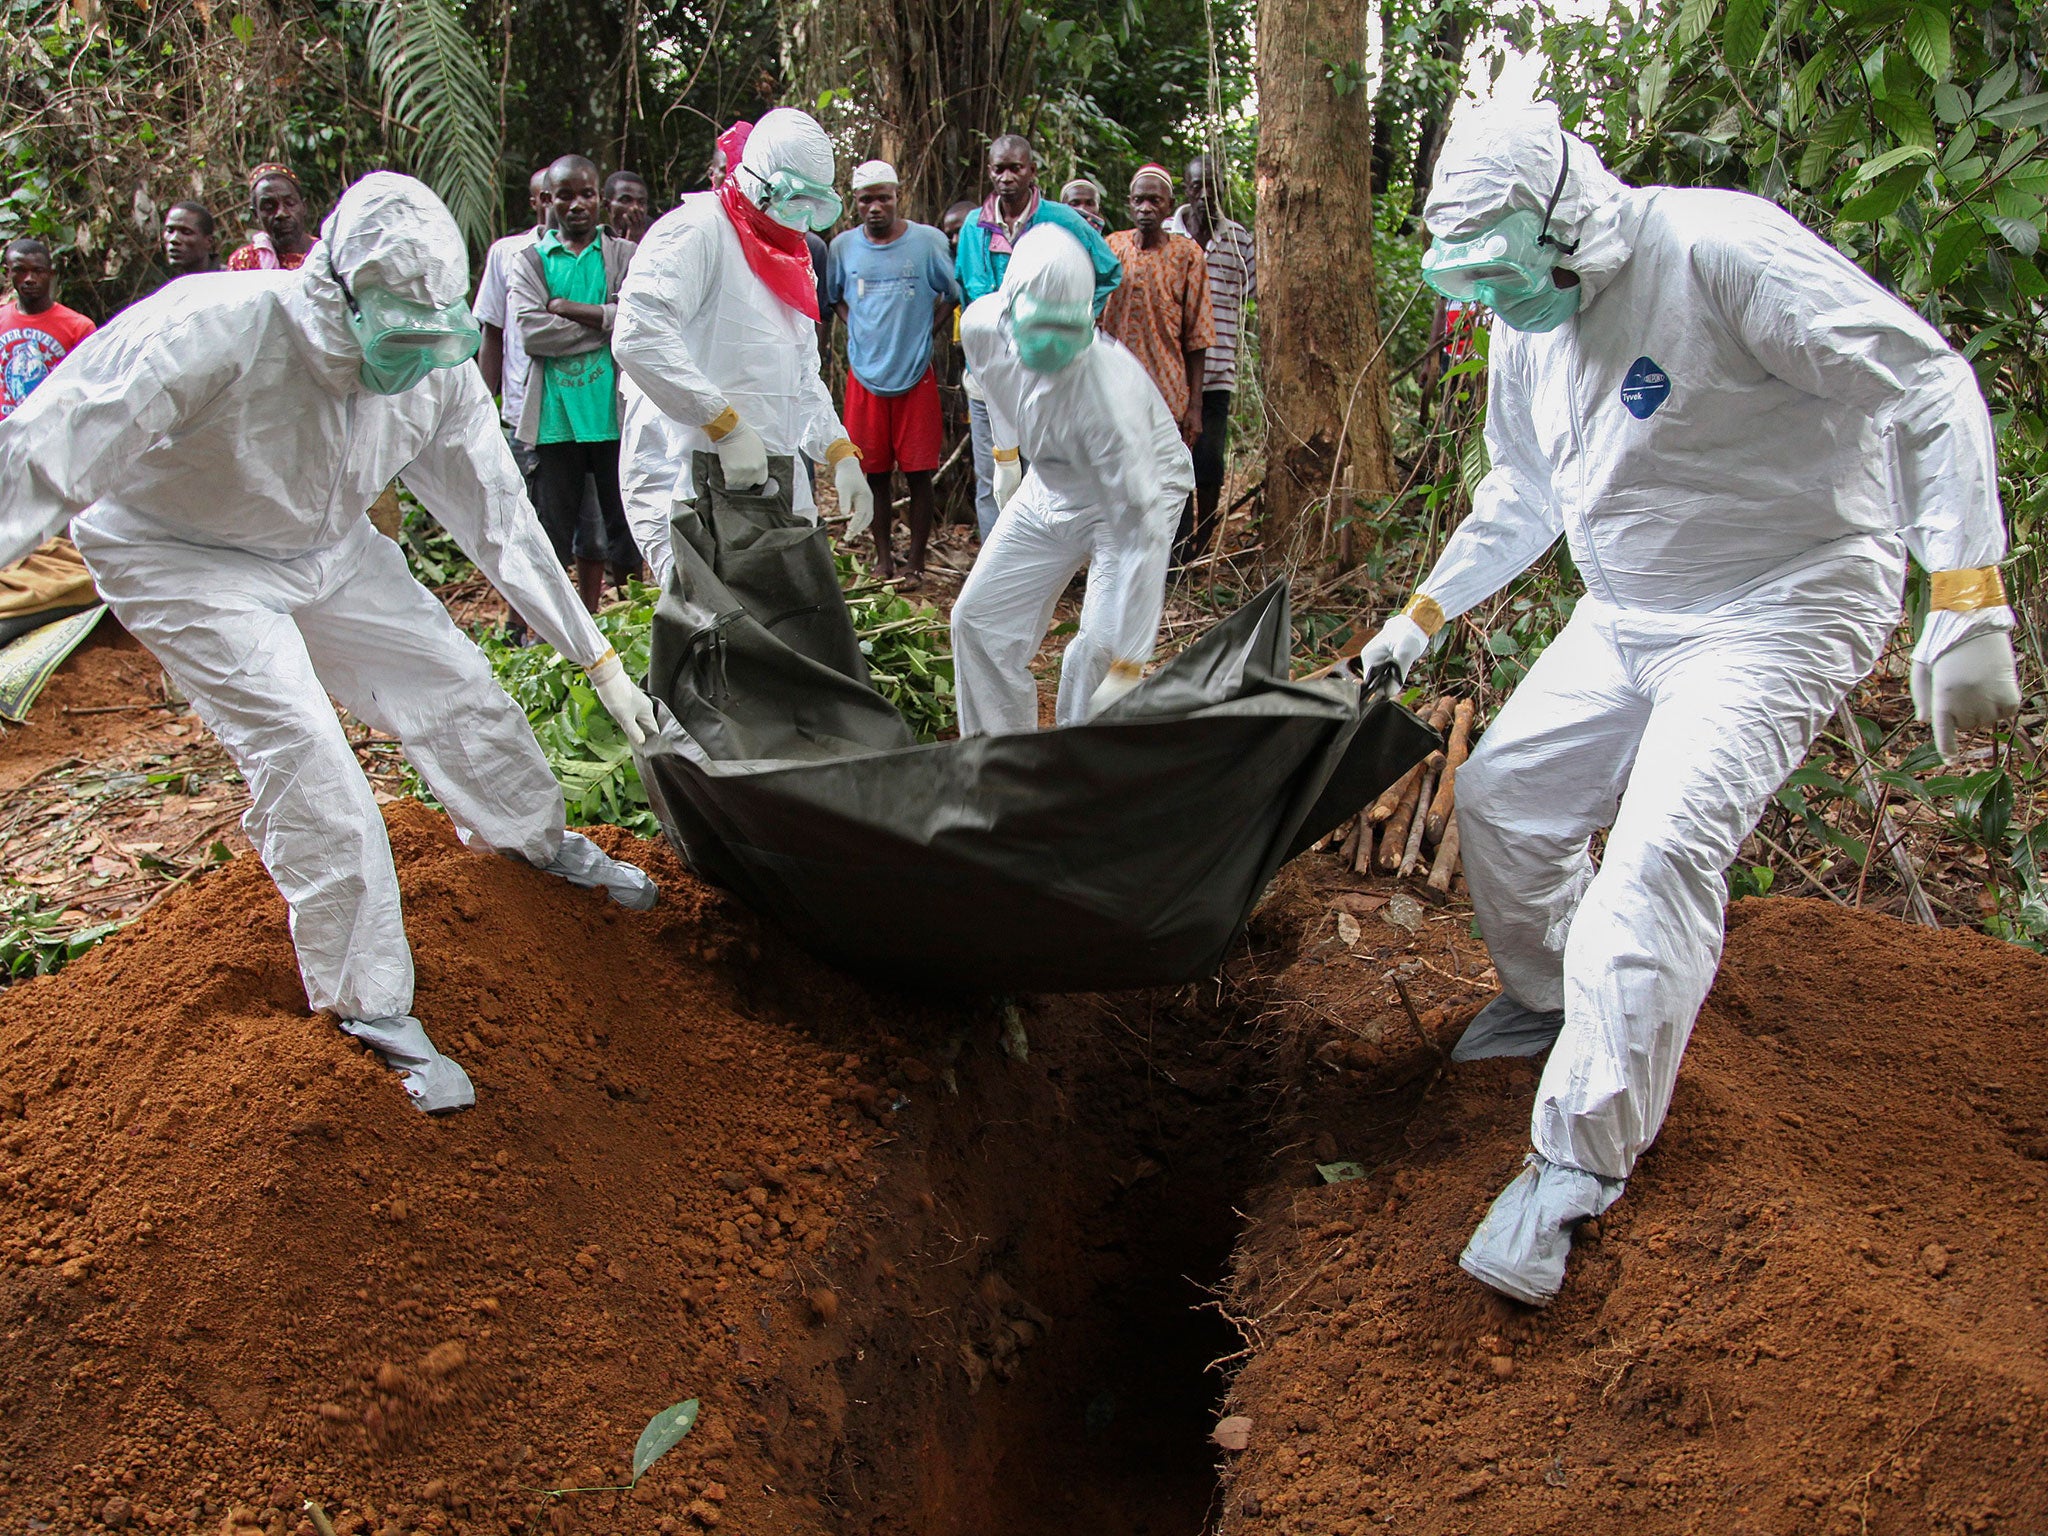 Liberian nurses in protective clothing bury the body of an Ebola victim in the Banjor community on the outskirts of Monrovia, a city in the grip of a real-life nightmare